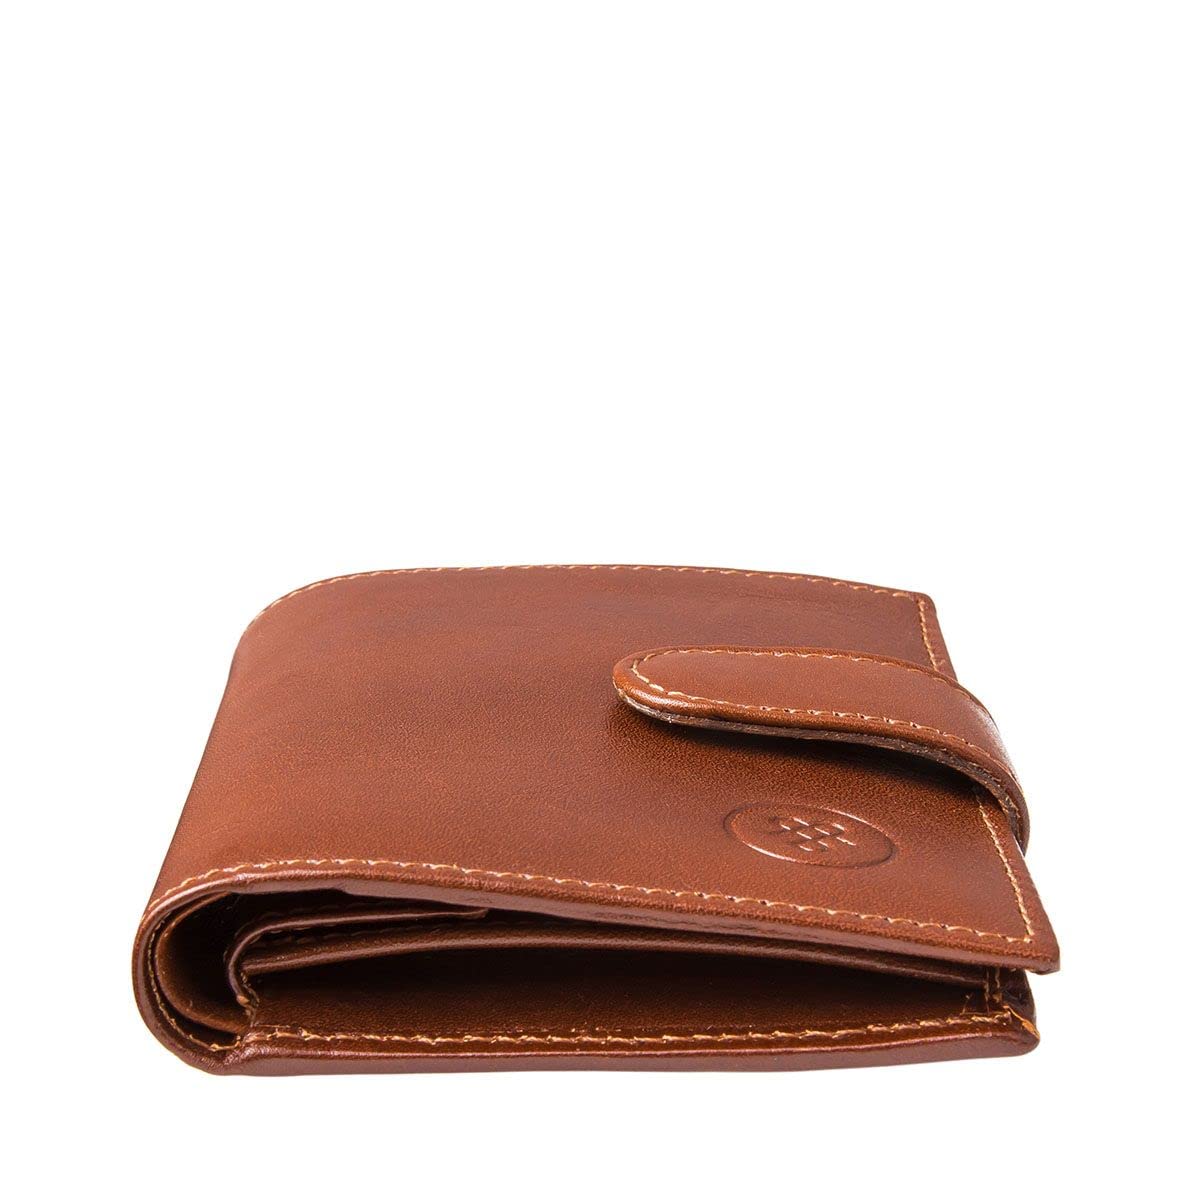 Maxwell Scott | Mens Luxury Leather Small Wallet | The Pietre | Handmade In Italy | Chestnut Tan Brown